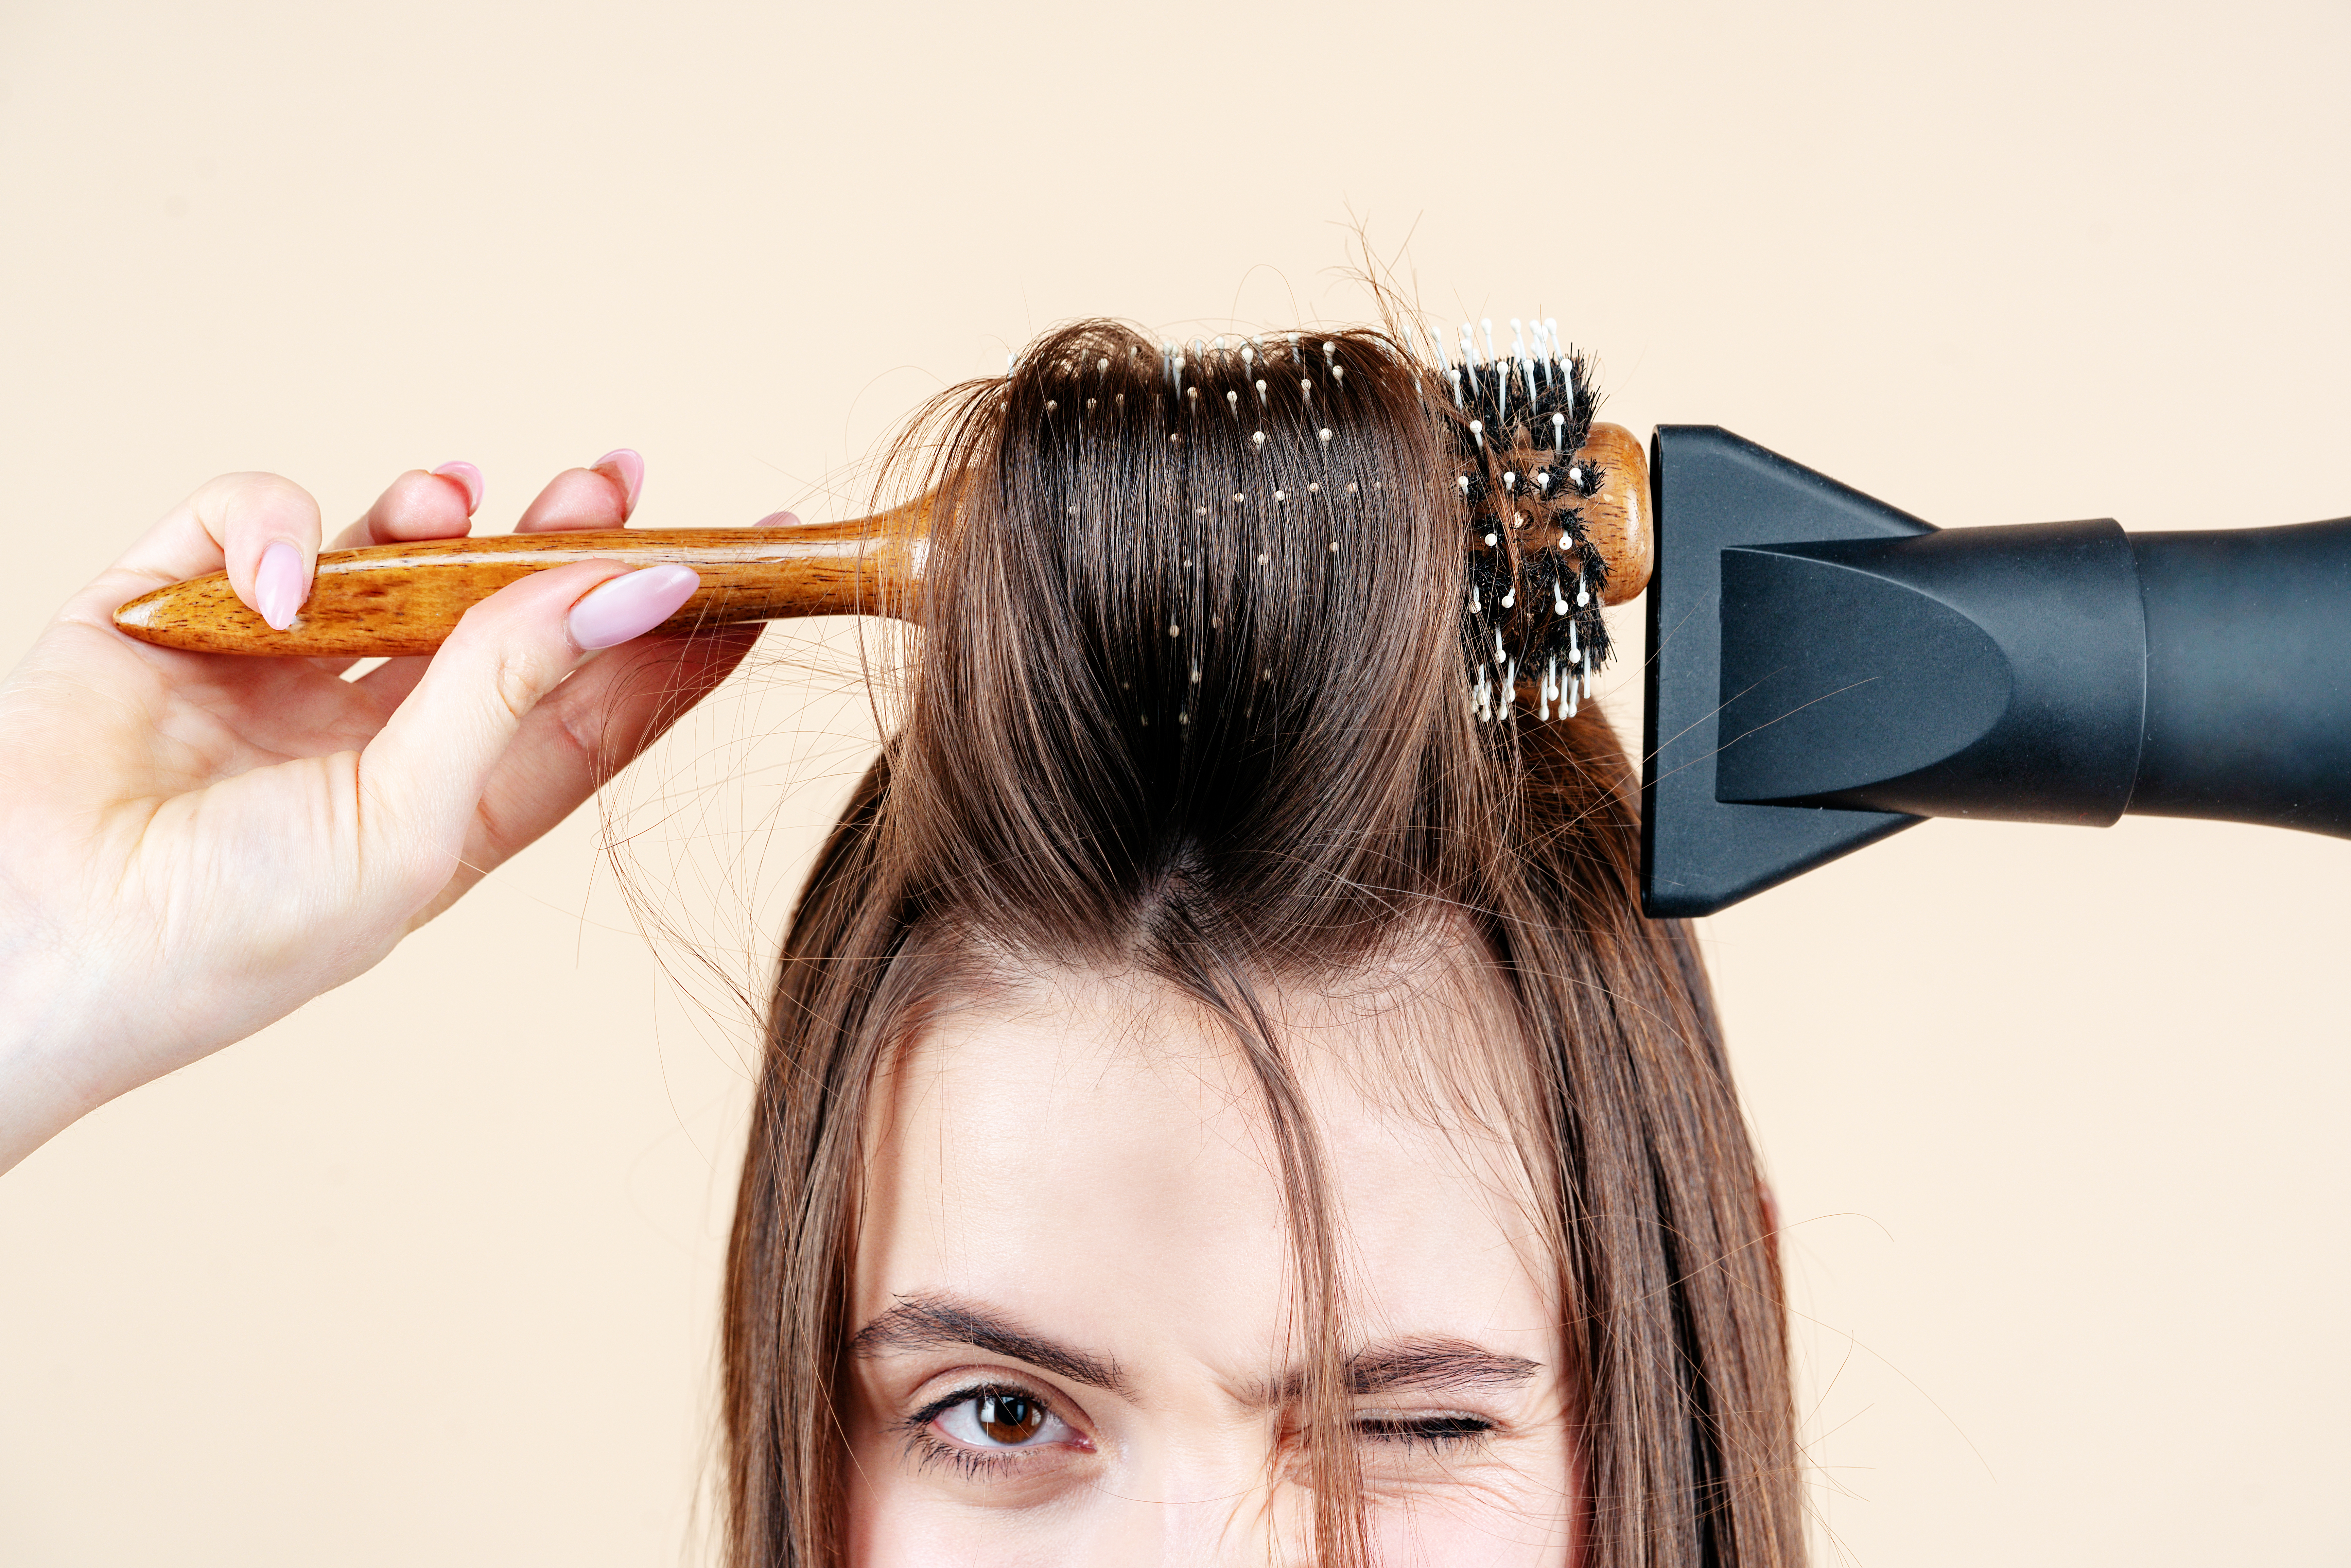 A close-up of a woman blow-drying her hair | Source: Shutterstock